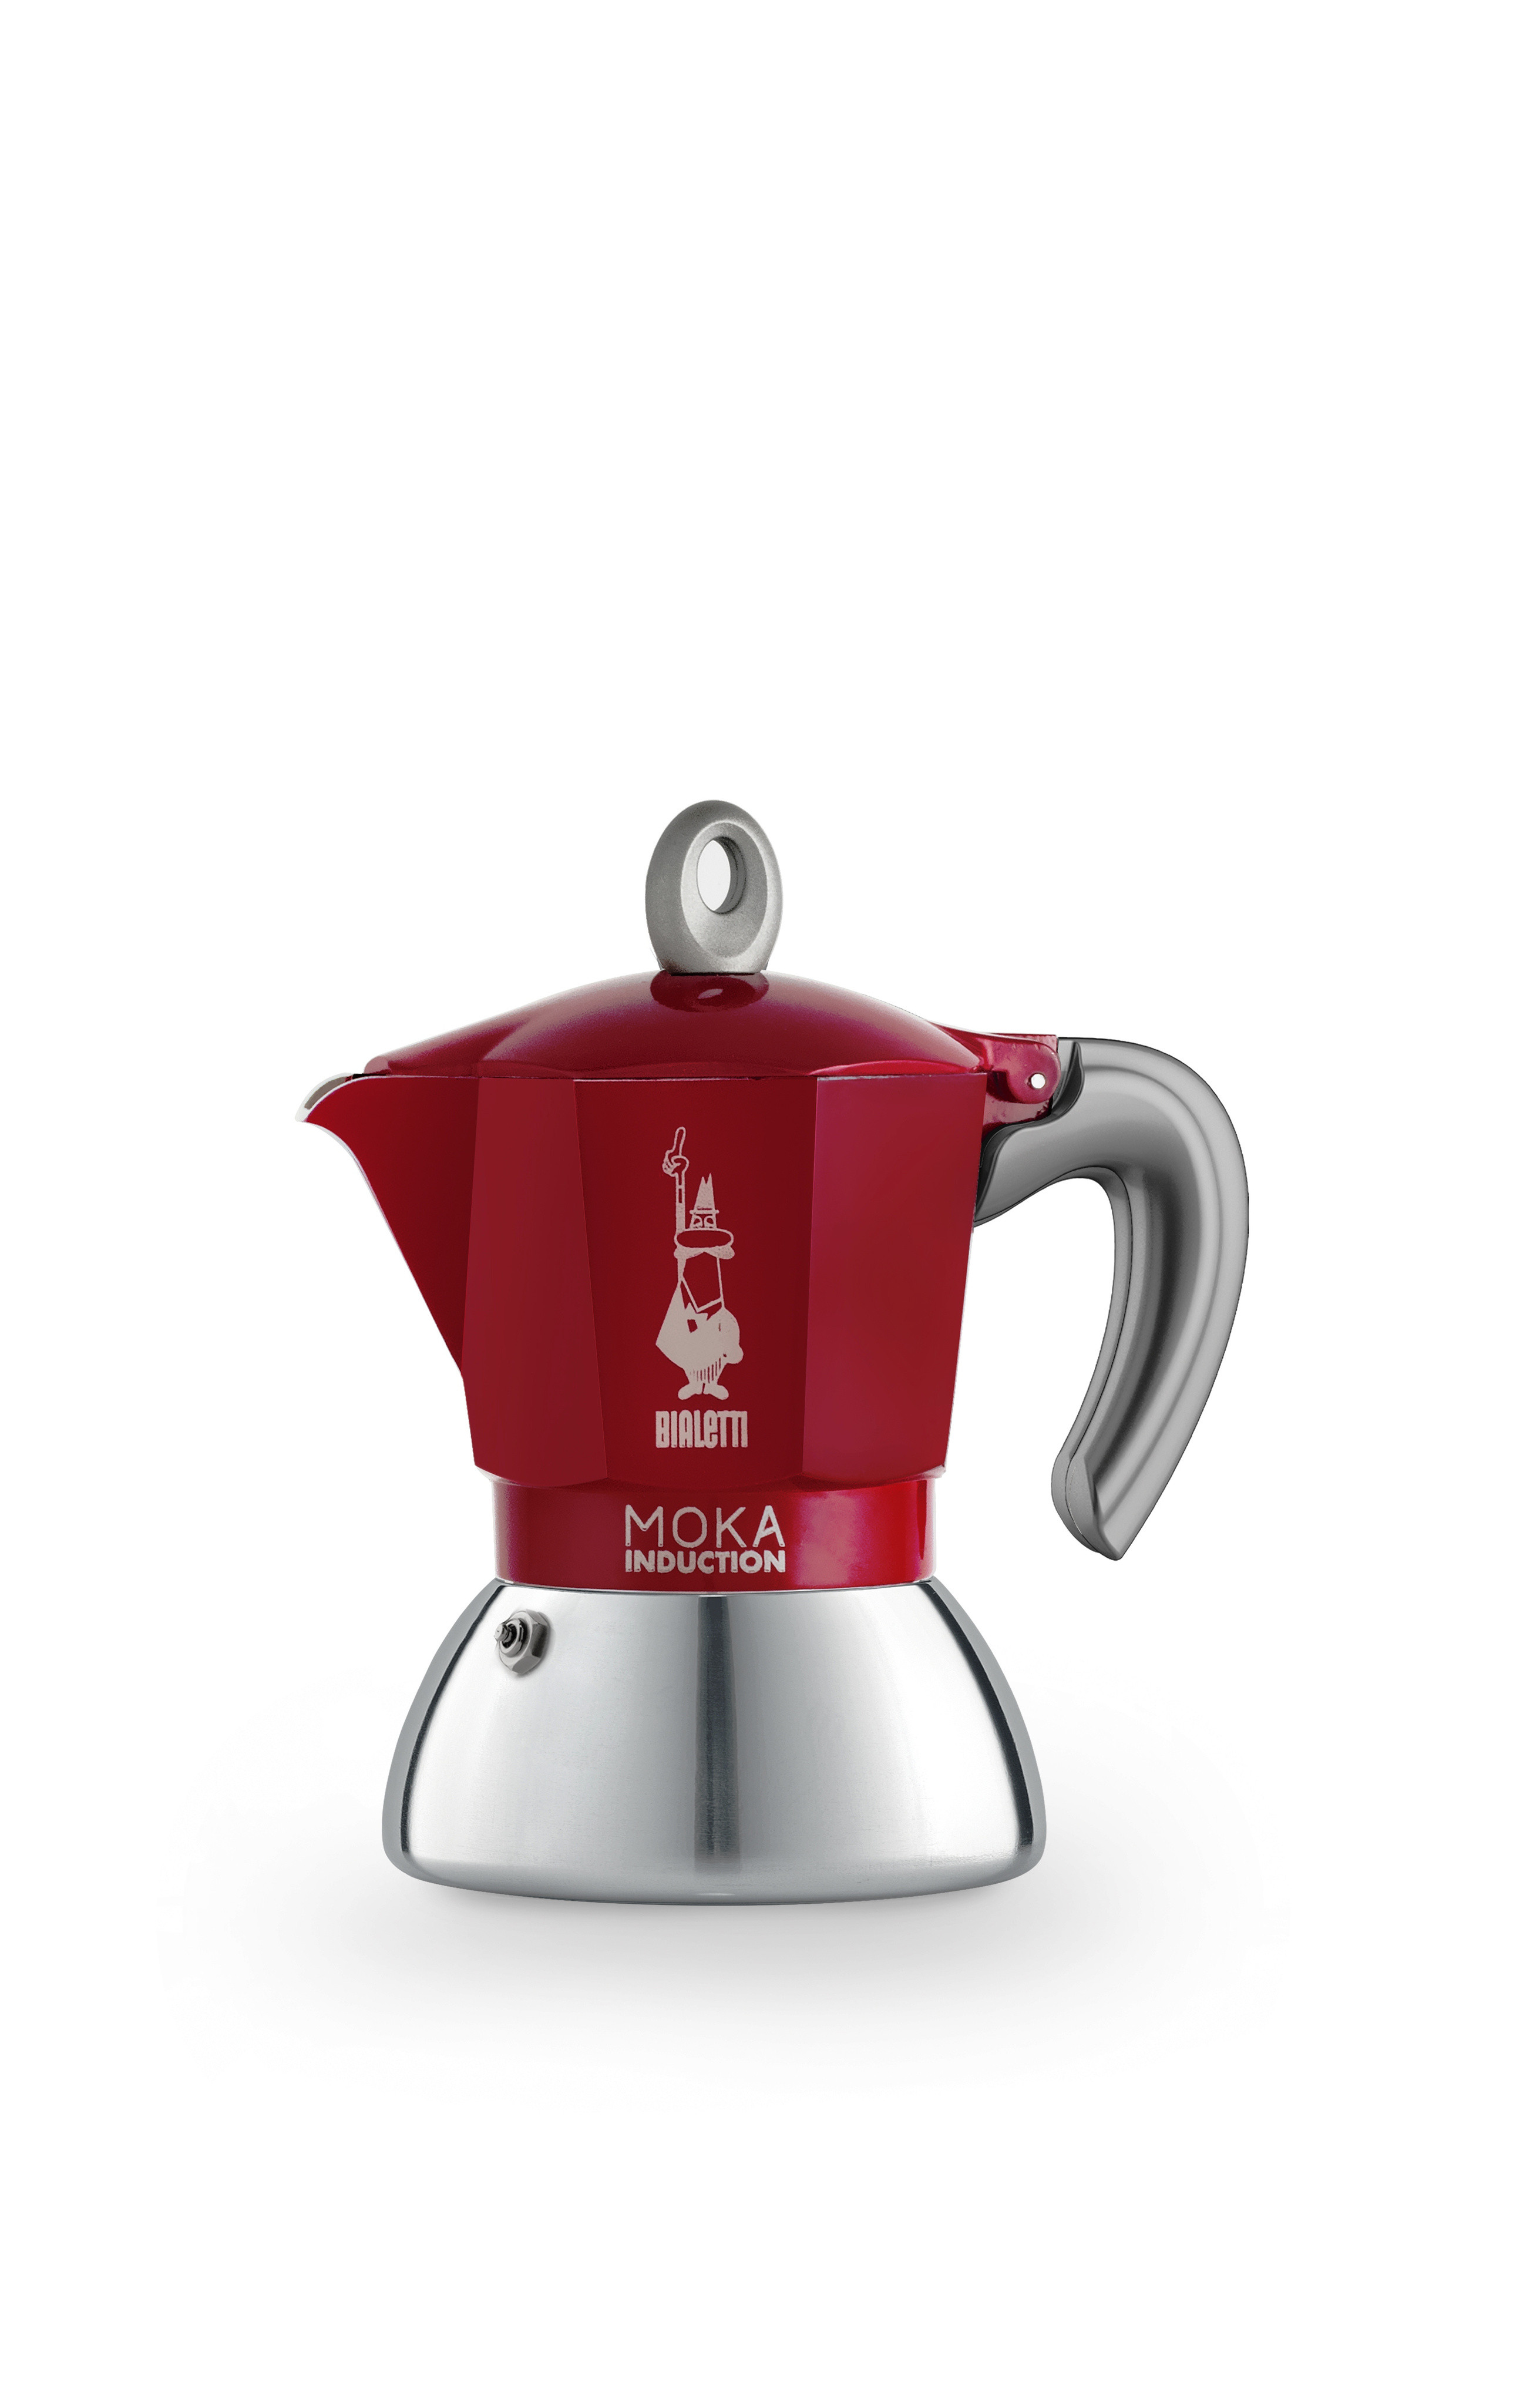 Bialetti - Moka Induction 2 cups, Red, large image number 0